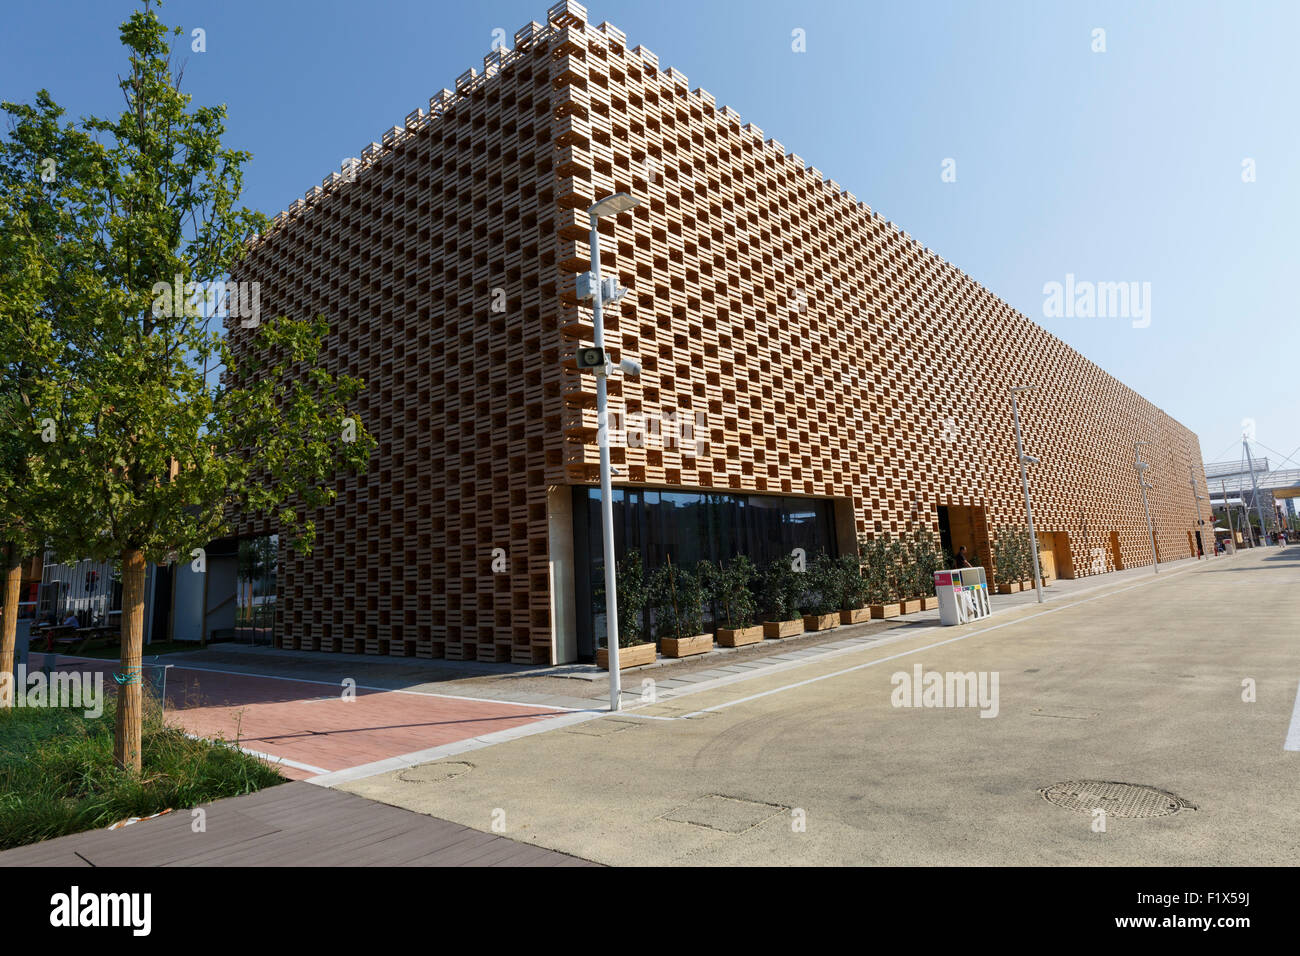 Milan, Italy, 12 August 2015: Detail of the Poland pavilion at the exhibition Expo 2015 Italy. Stock Photo